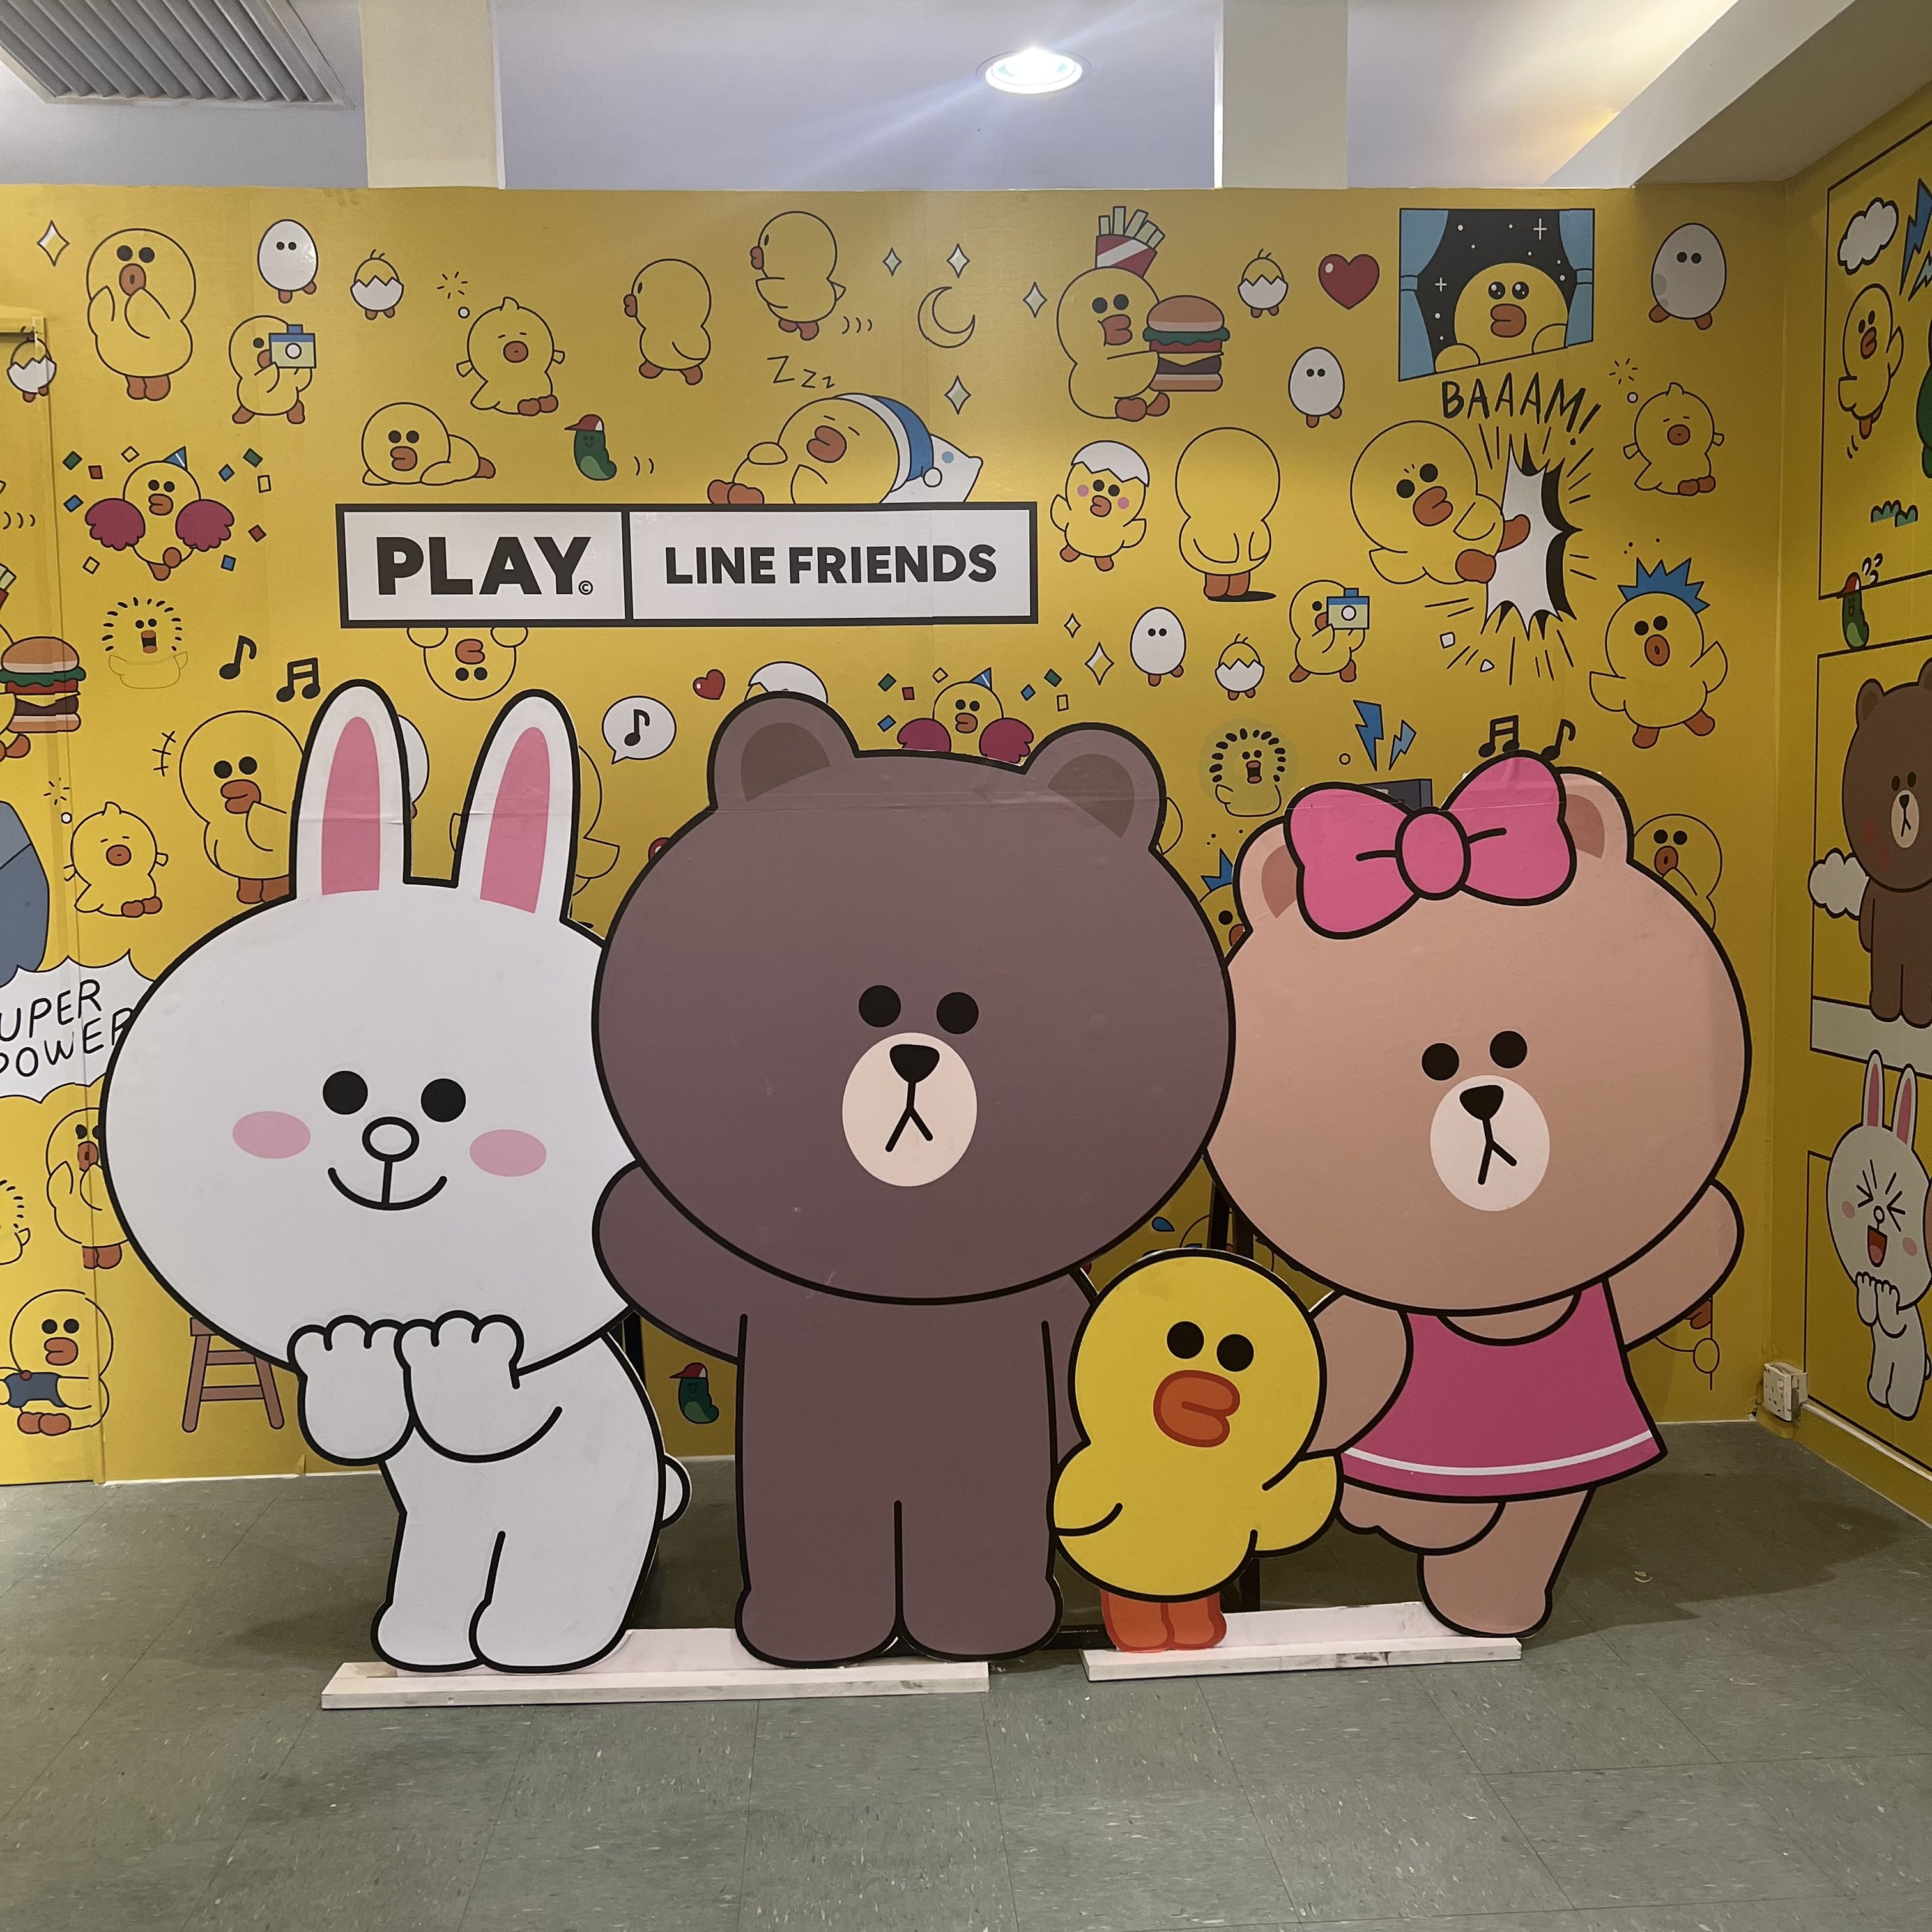 PLAY LINE FRIENDS returns to Malaysia with first pop-up store in Sabah